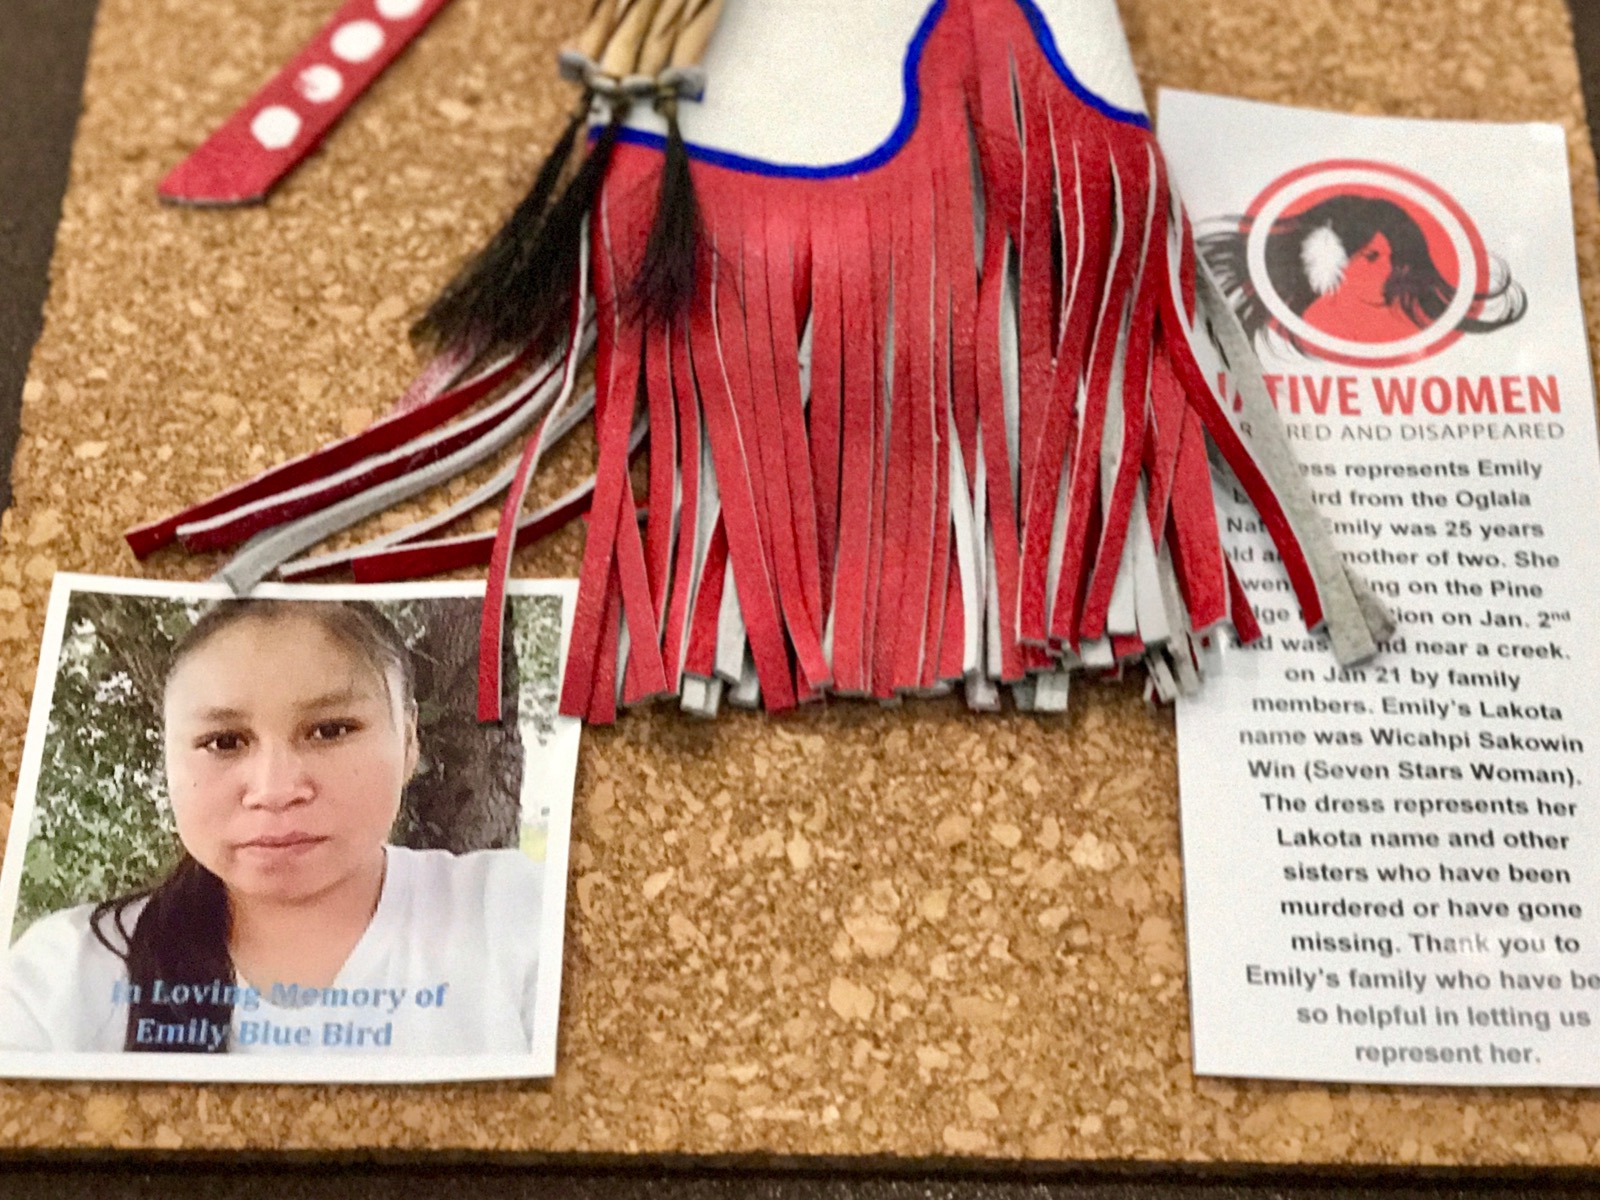 Mary Annette Pember: Little data on missing and murdered Native women and girls